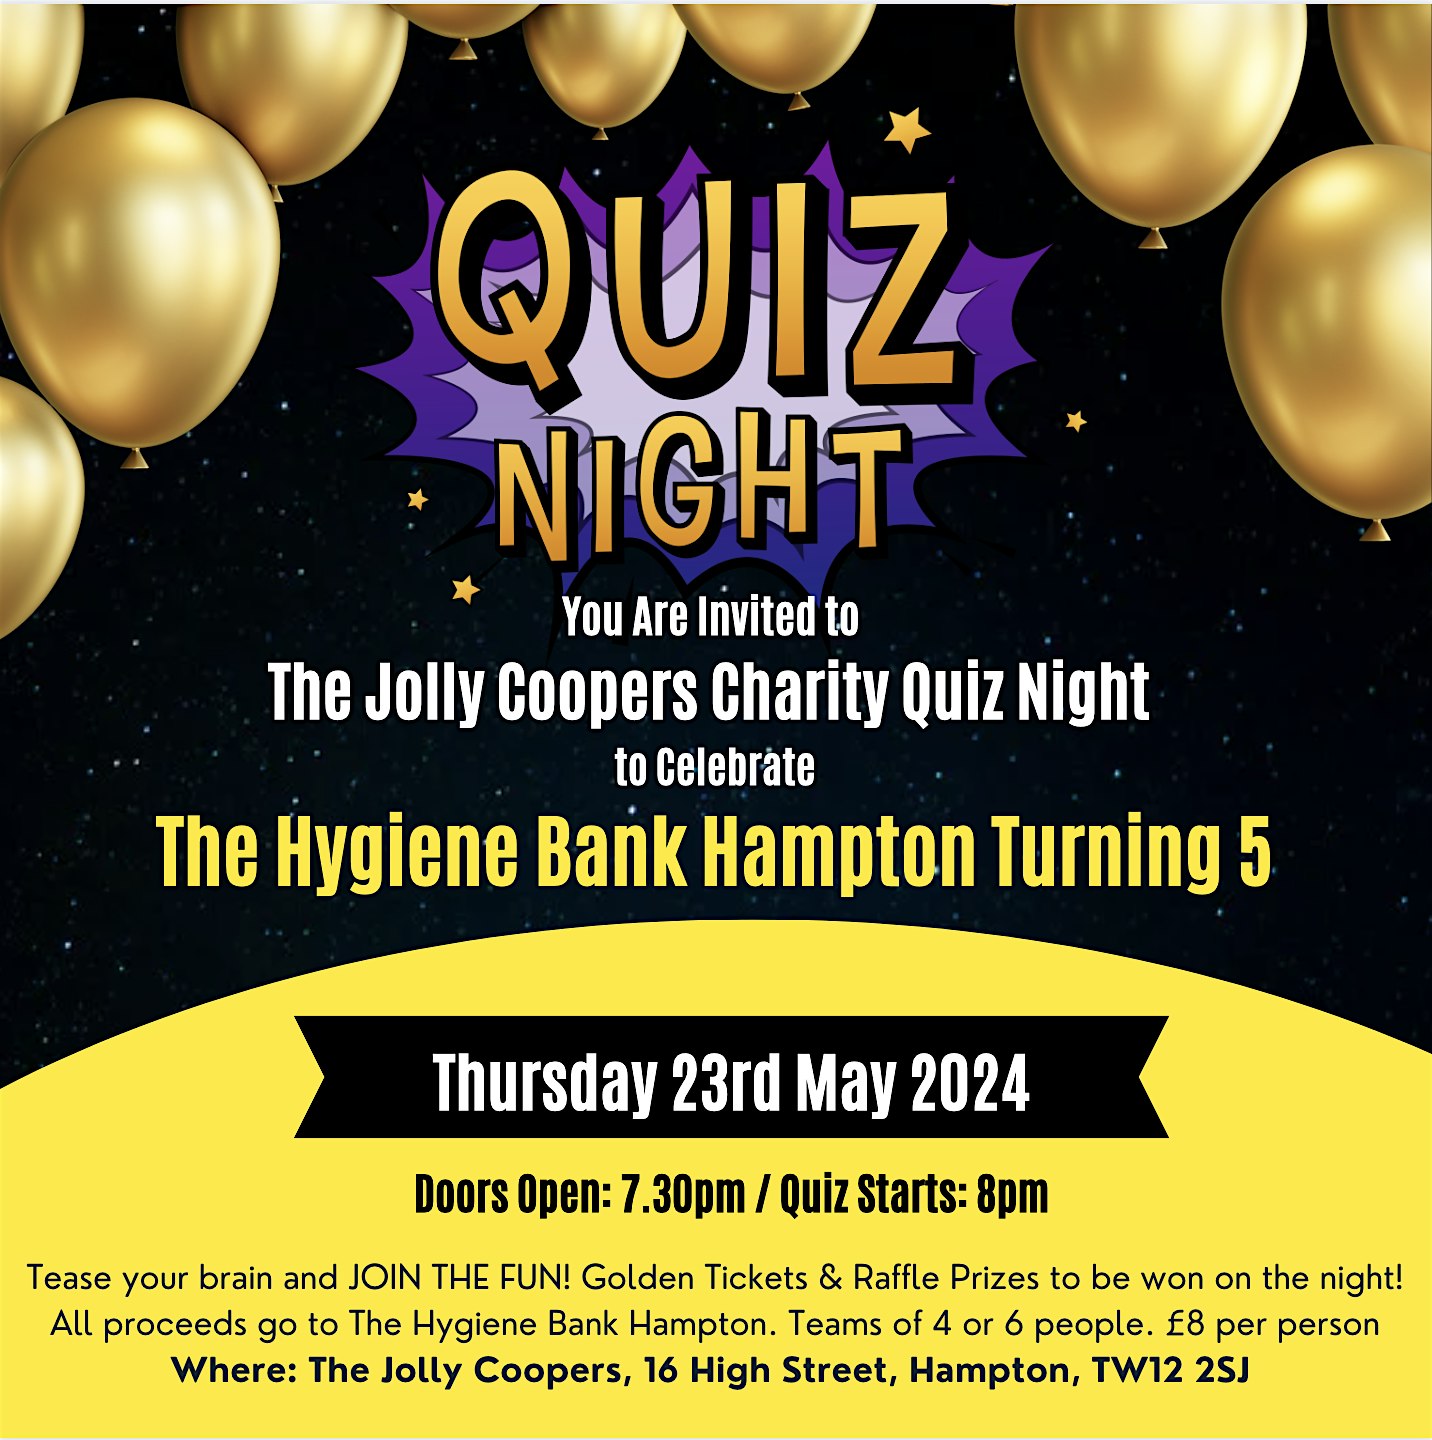 The Jolly Coopers Charity Quiz Night